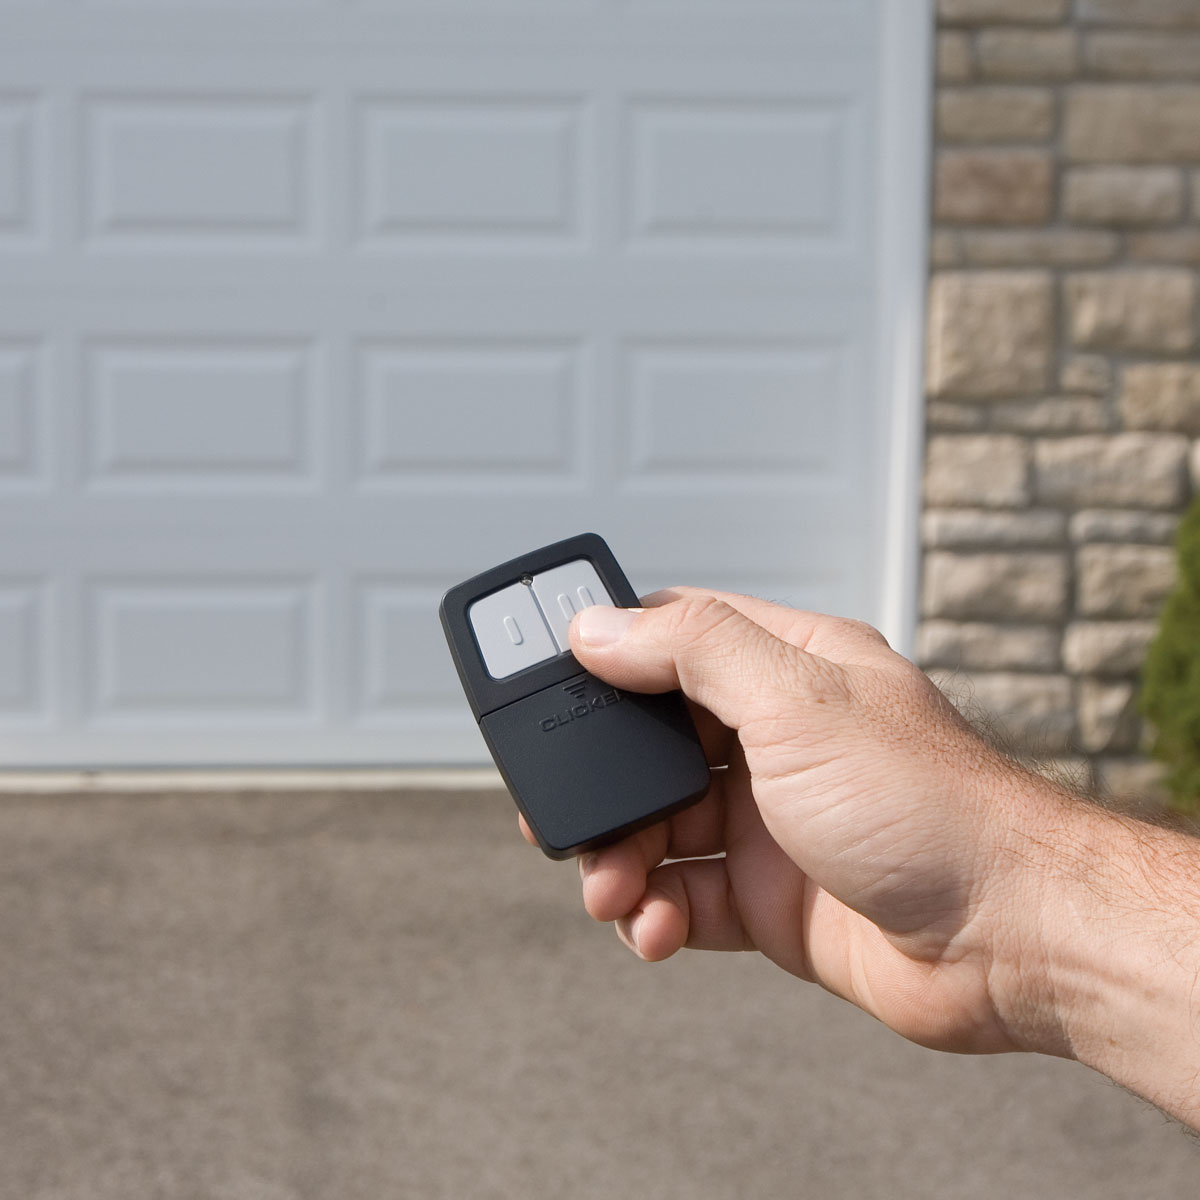 Troubleshooting Common Garage Door Remote Issues and How to Fix Them